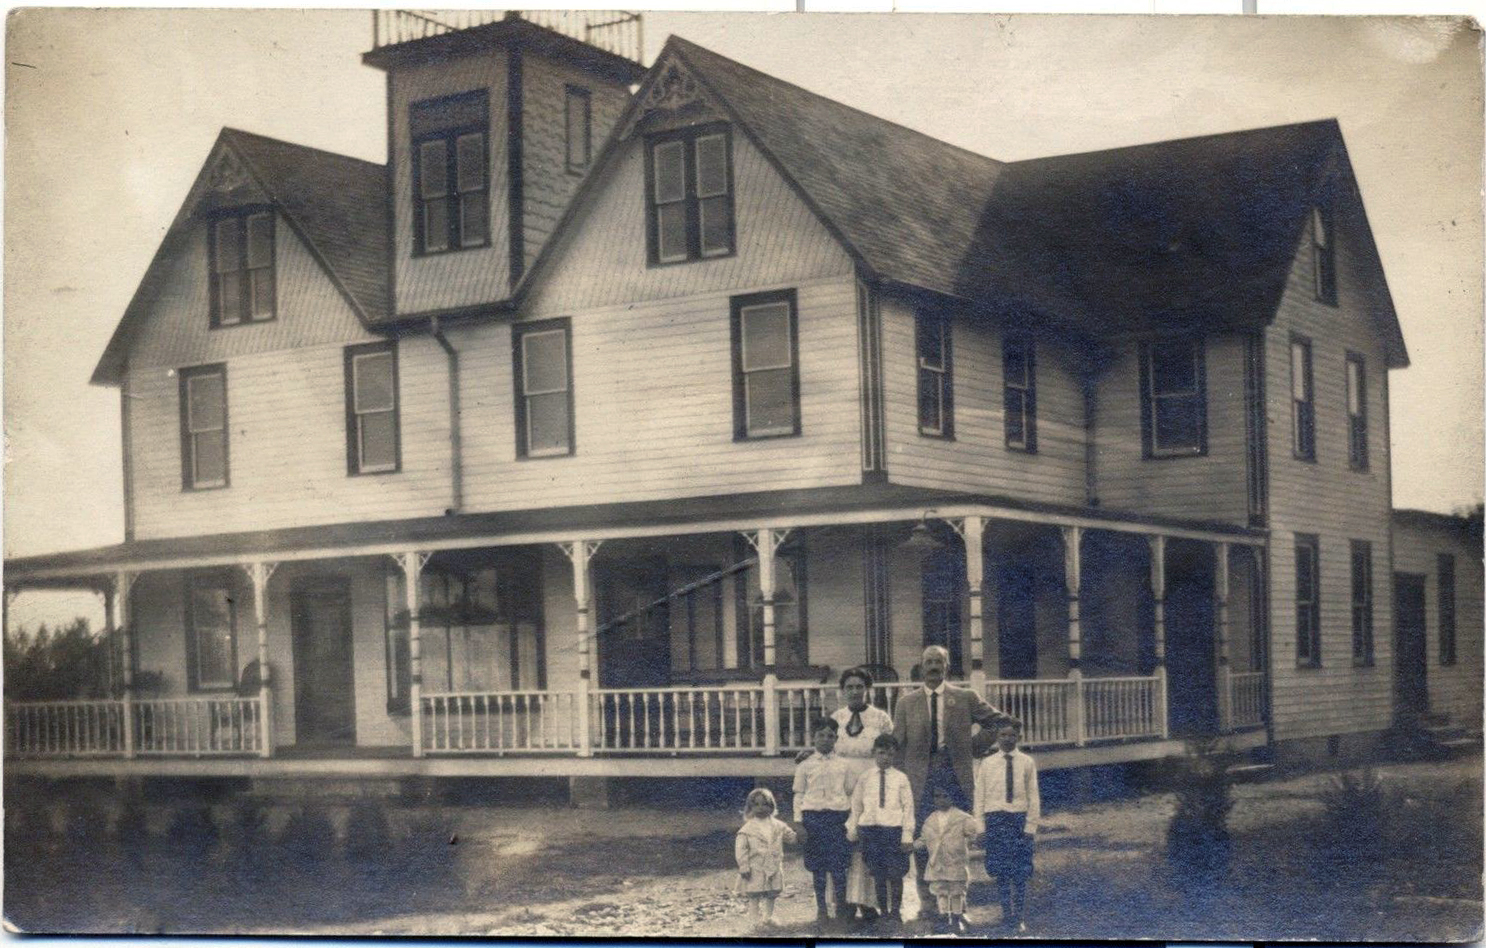 Dorothy - Hotel Dorothy - possibly with proprieters family - c 1910s or 20s